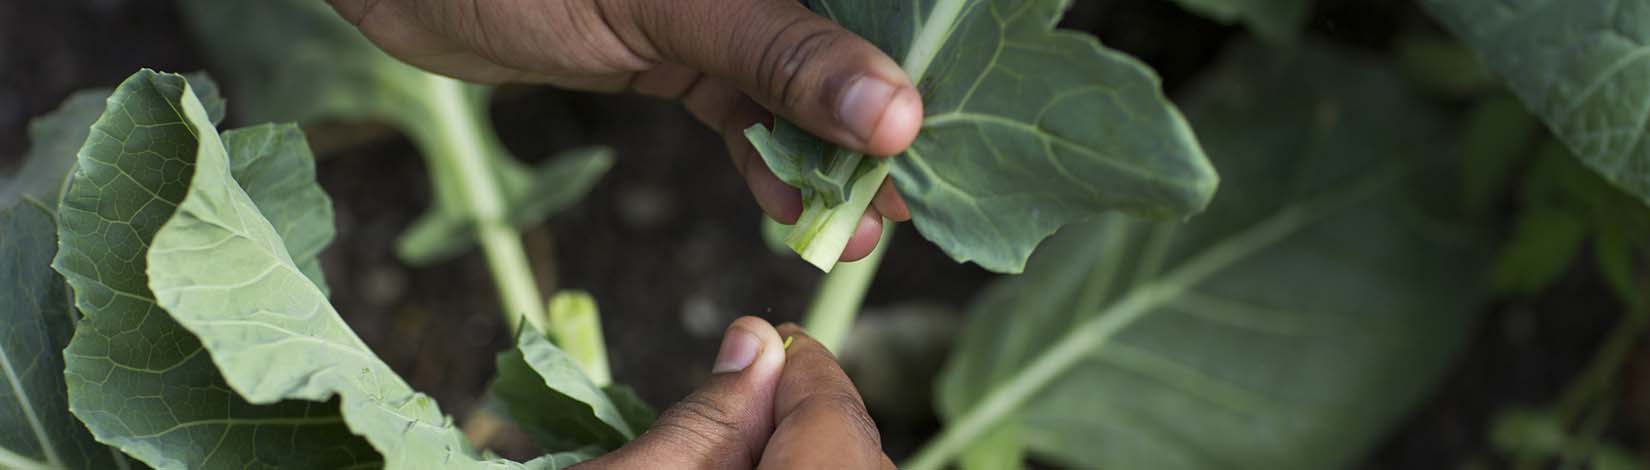 Hands picking a leafy green vegetable while vegetable gardening